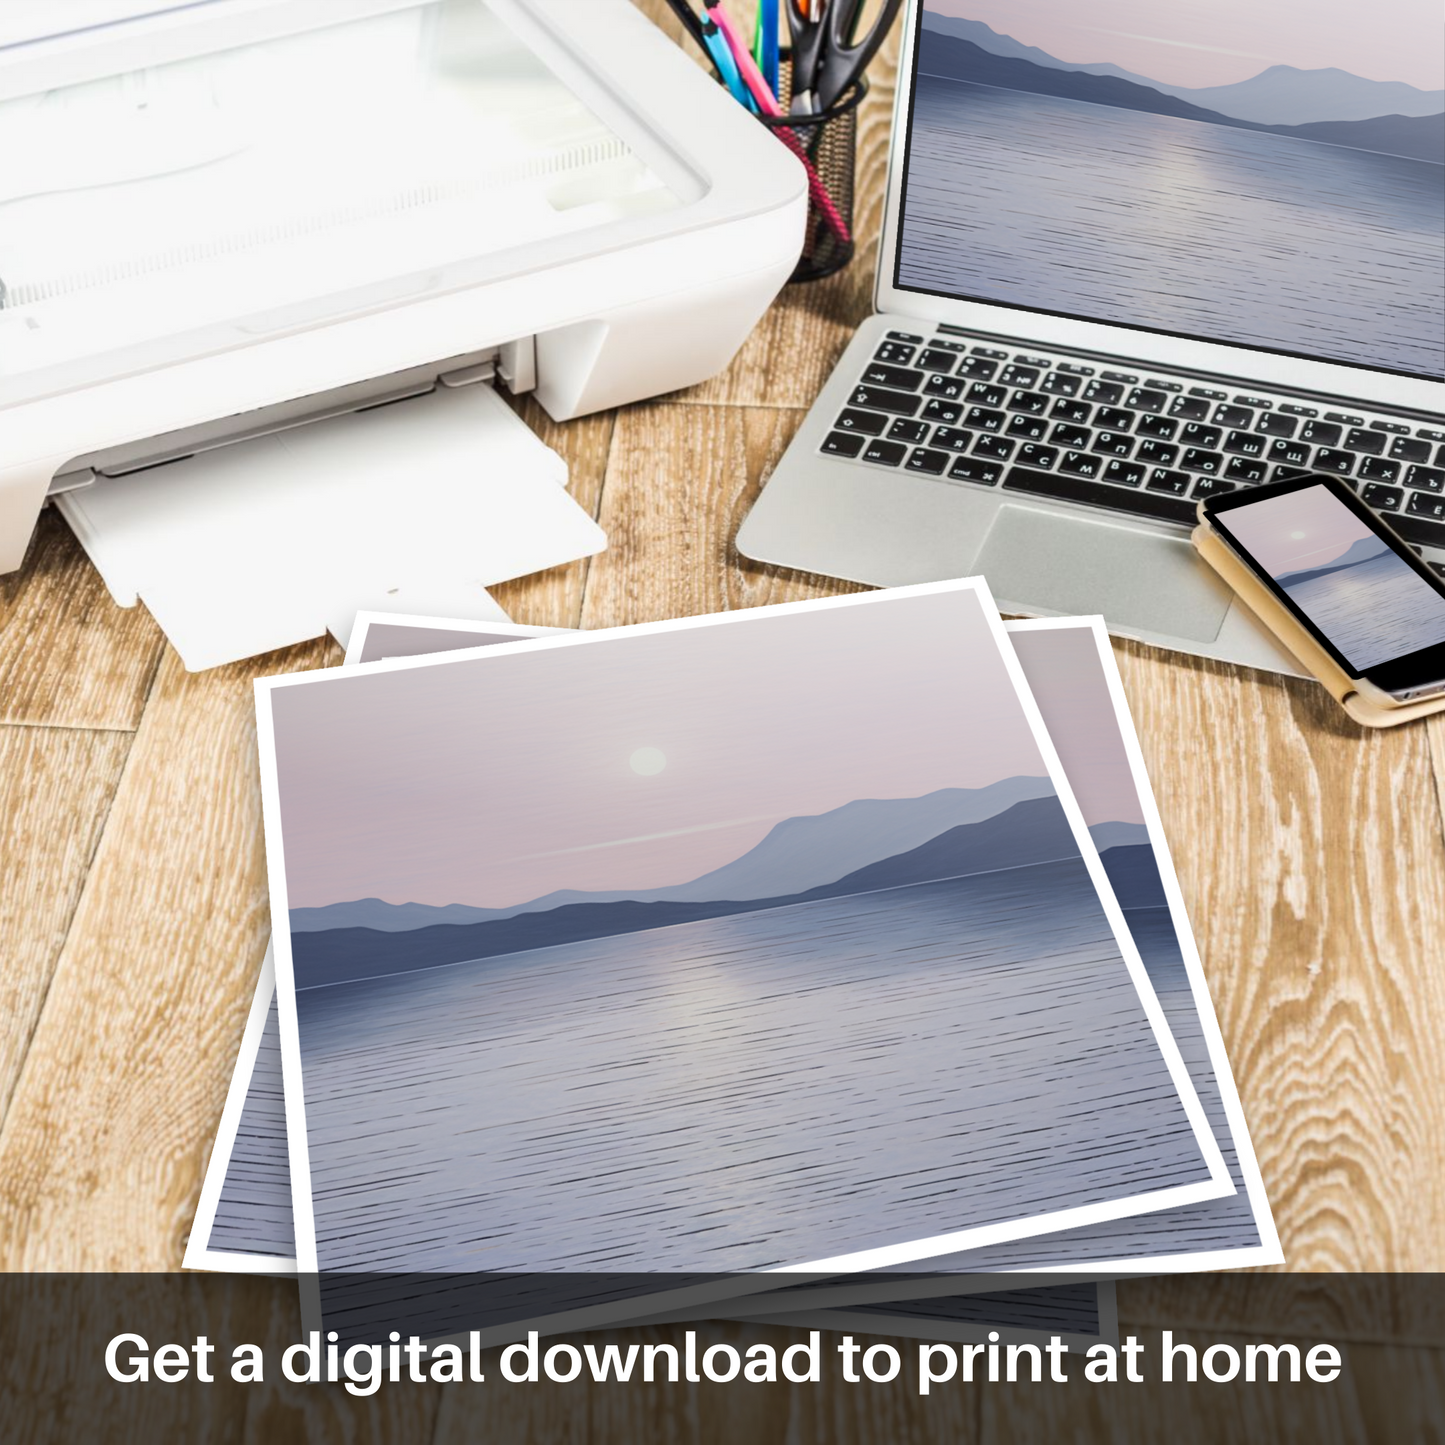 Downloadable and printable picture of Dusk on Loch Lomond